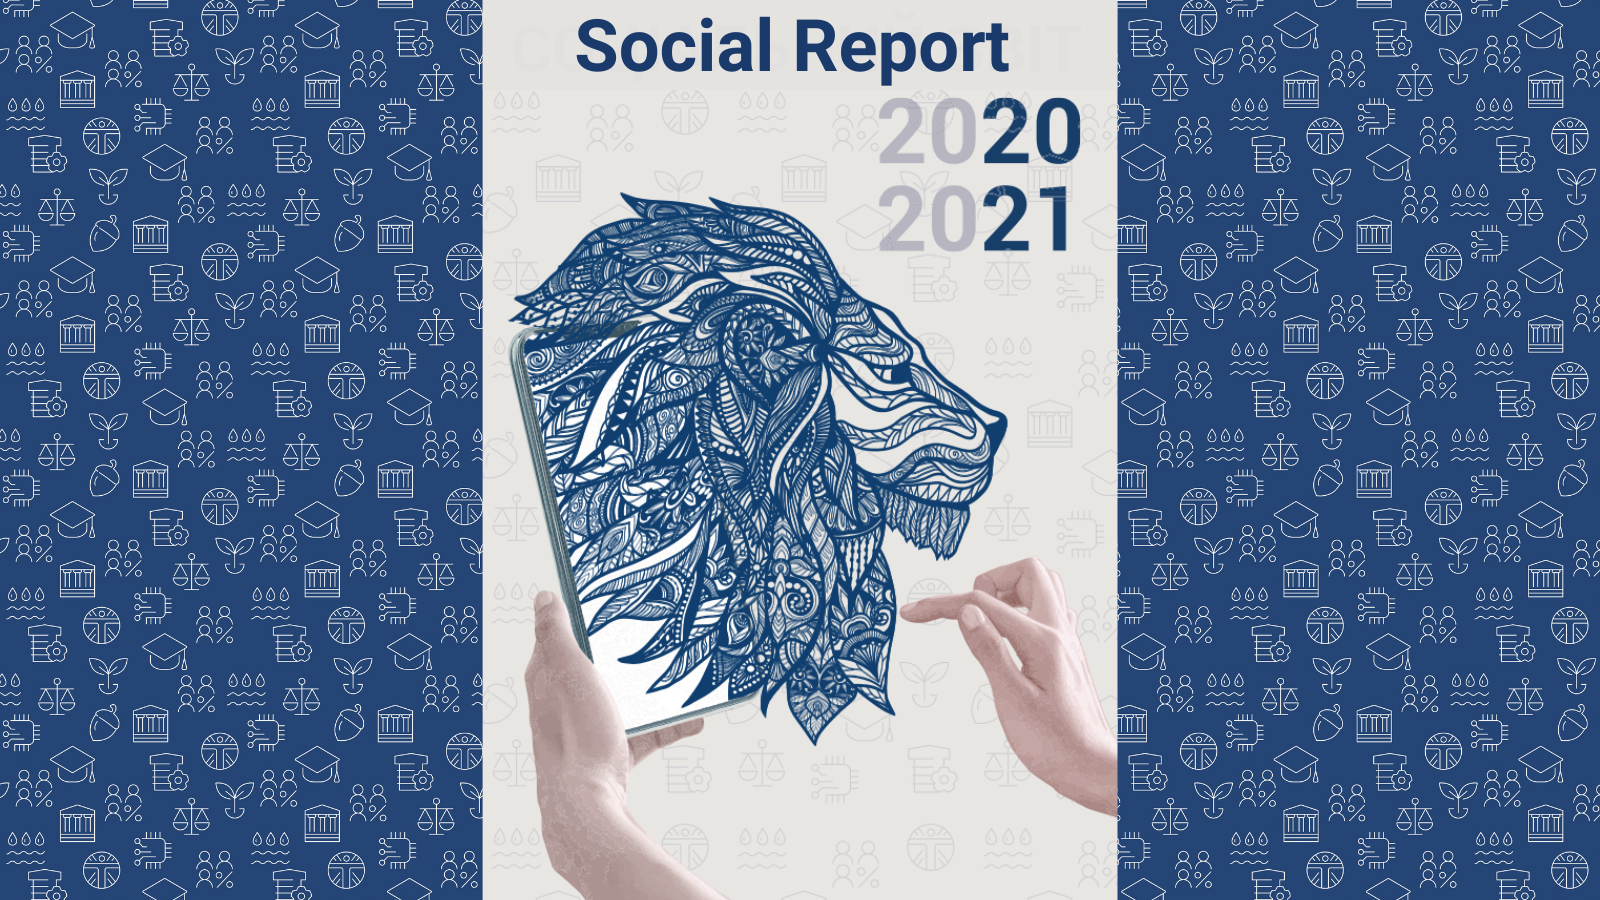 NUWEE presented the next Social Report to the public